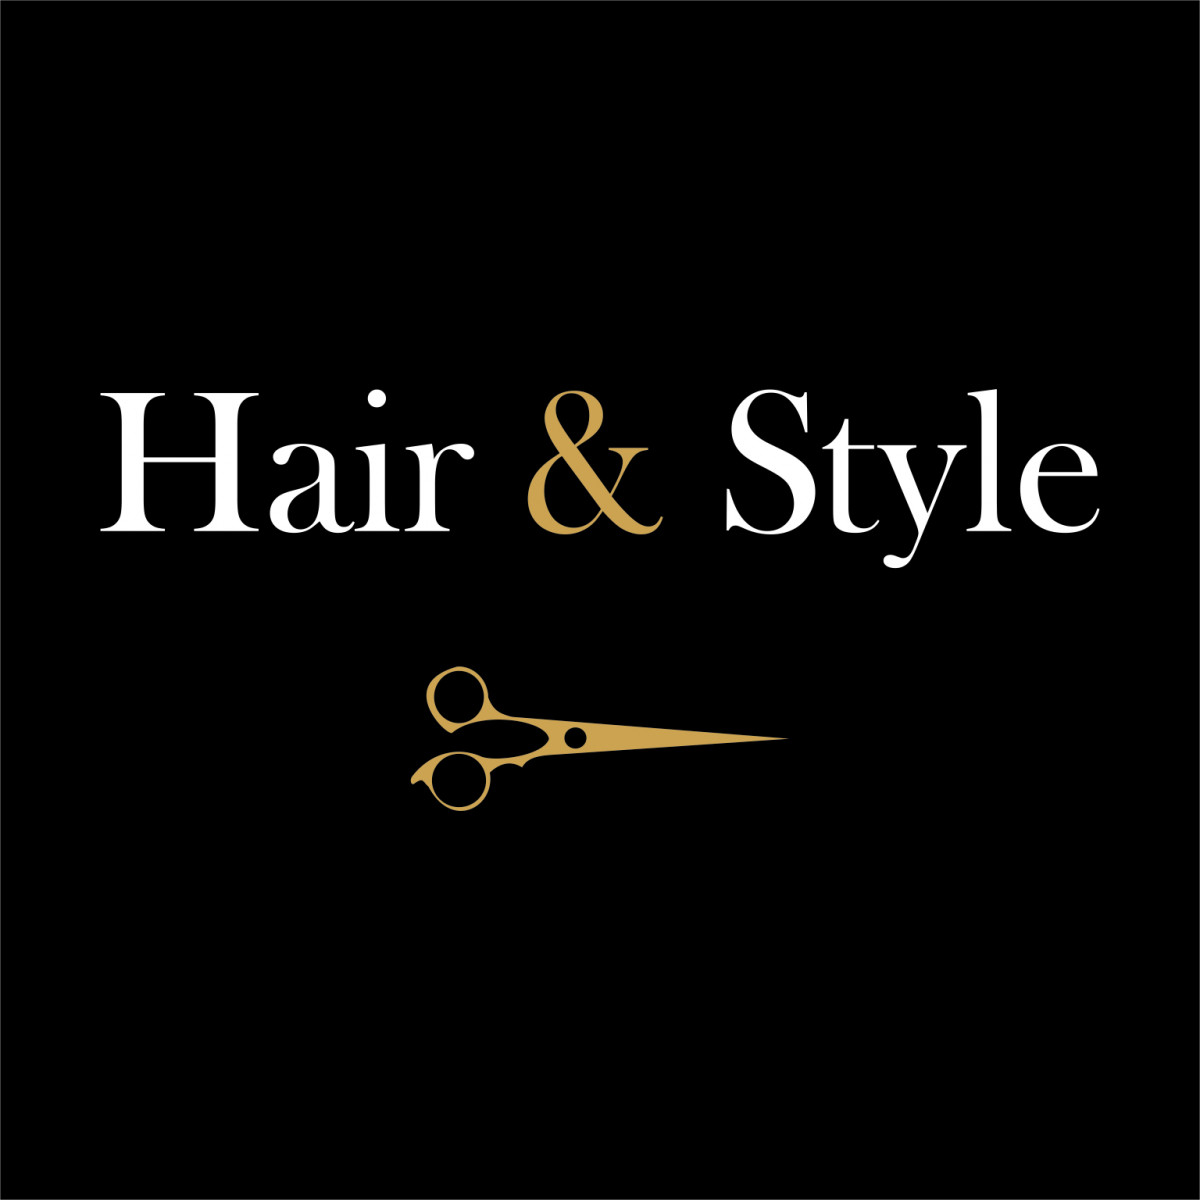 Hair and Style - Fodrászat